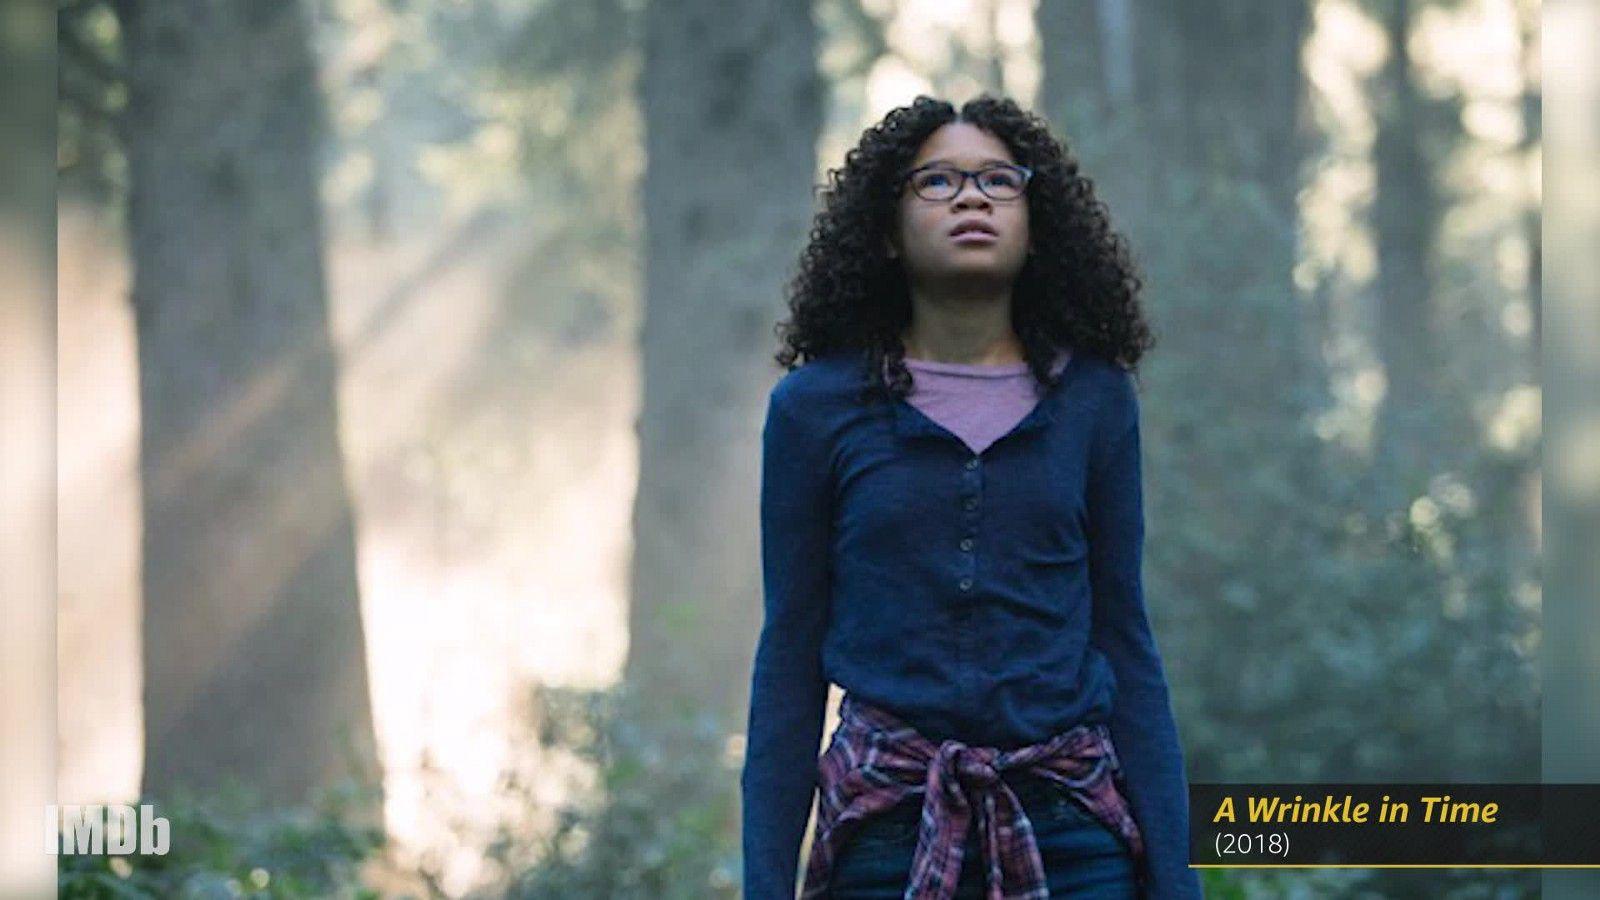 A Wrinkle in Time 2018: Feature and Review